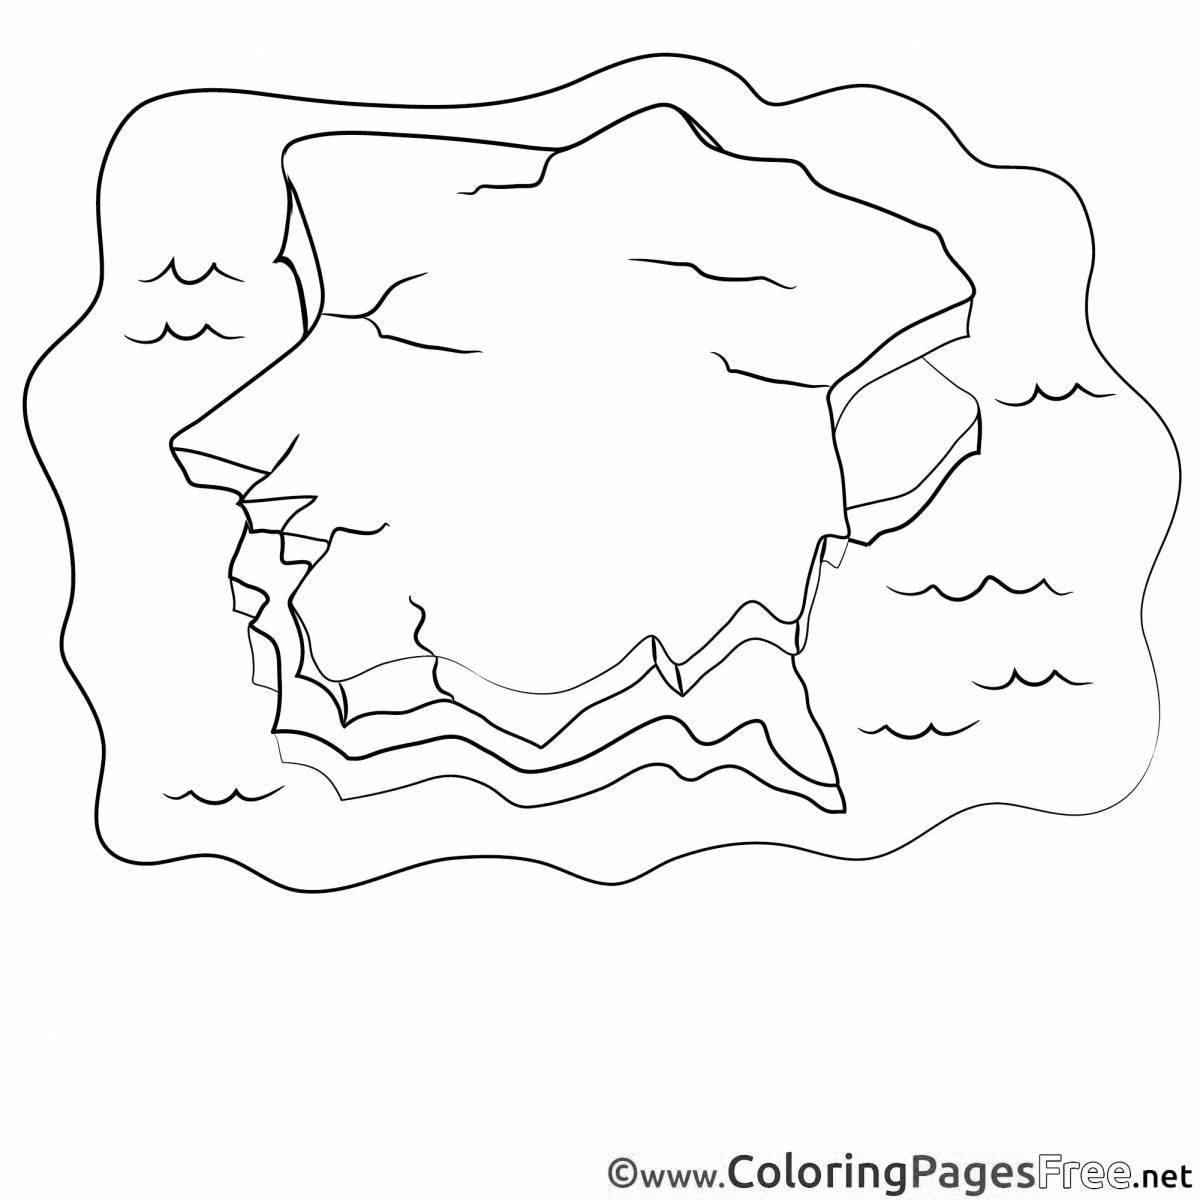 Glowing iceberg coloring page